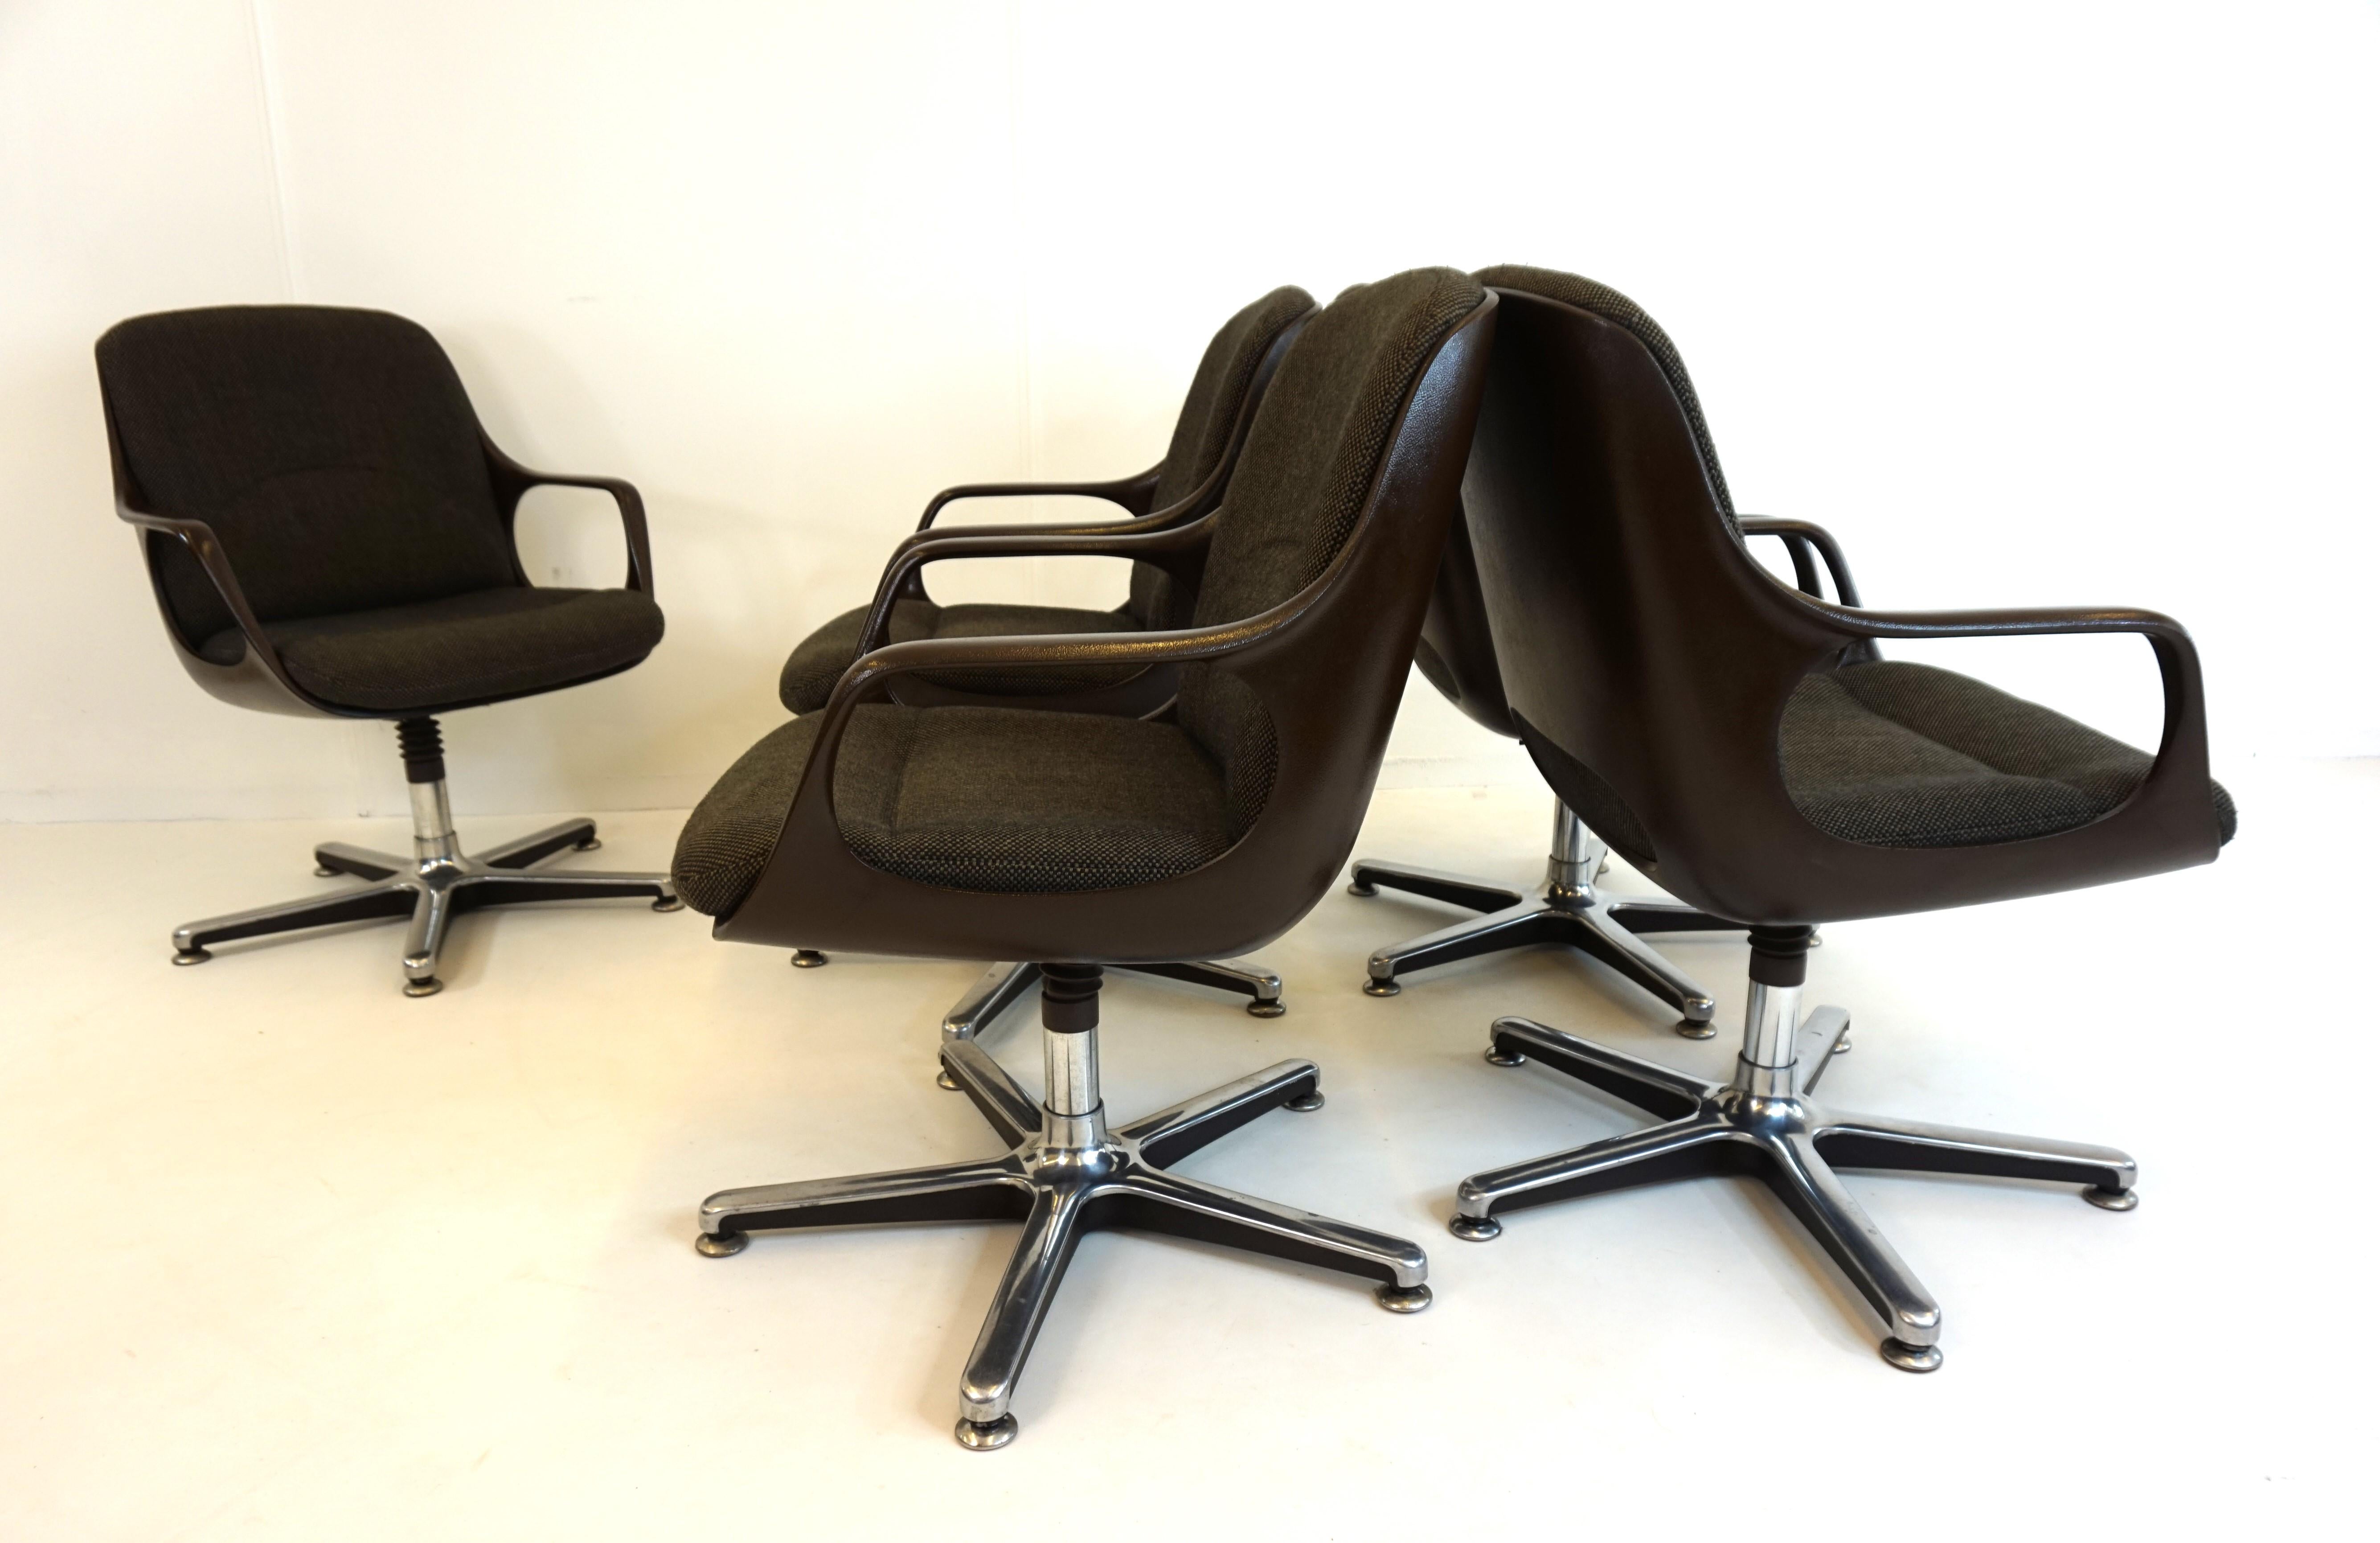 Chromcraft Set of 5 Space Age Office/Dining Room Chairs 2